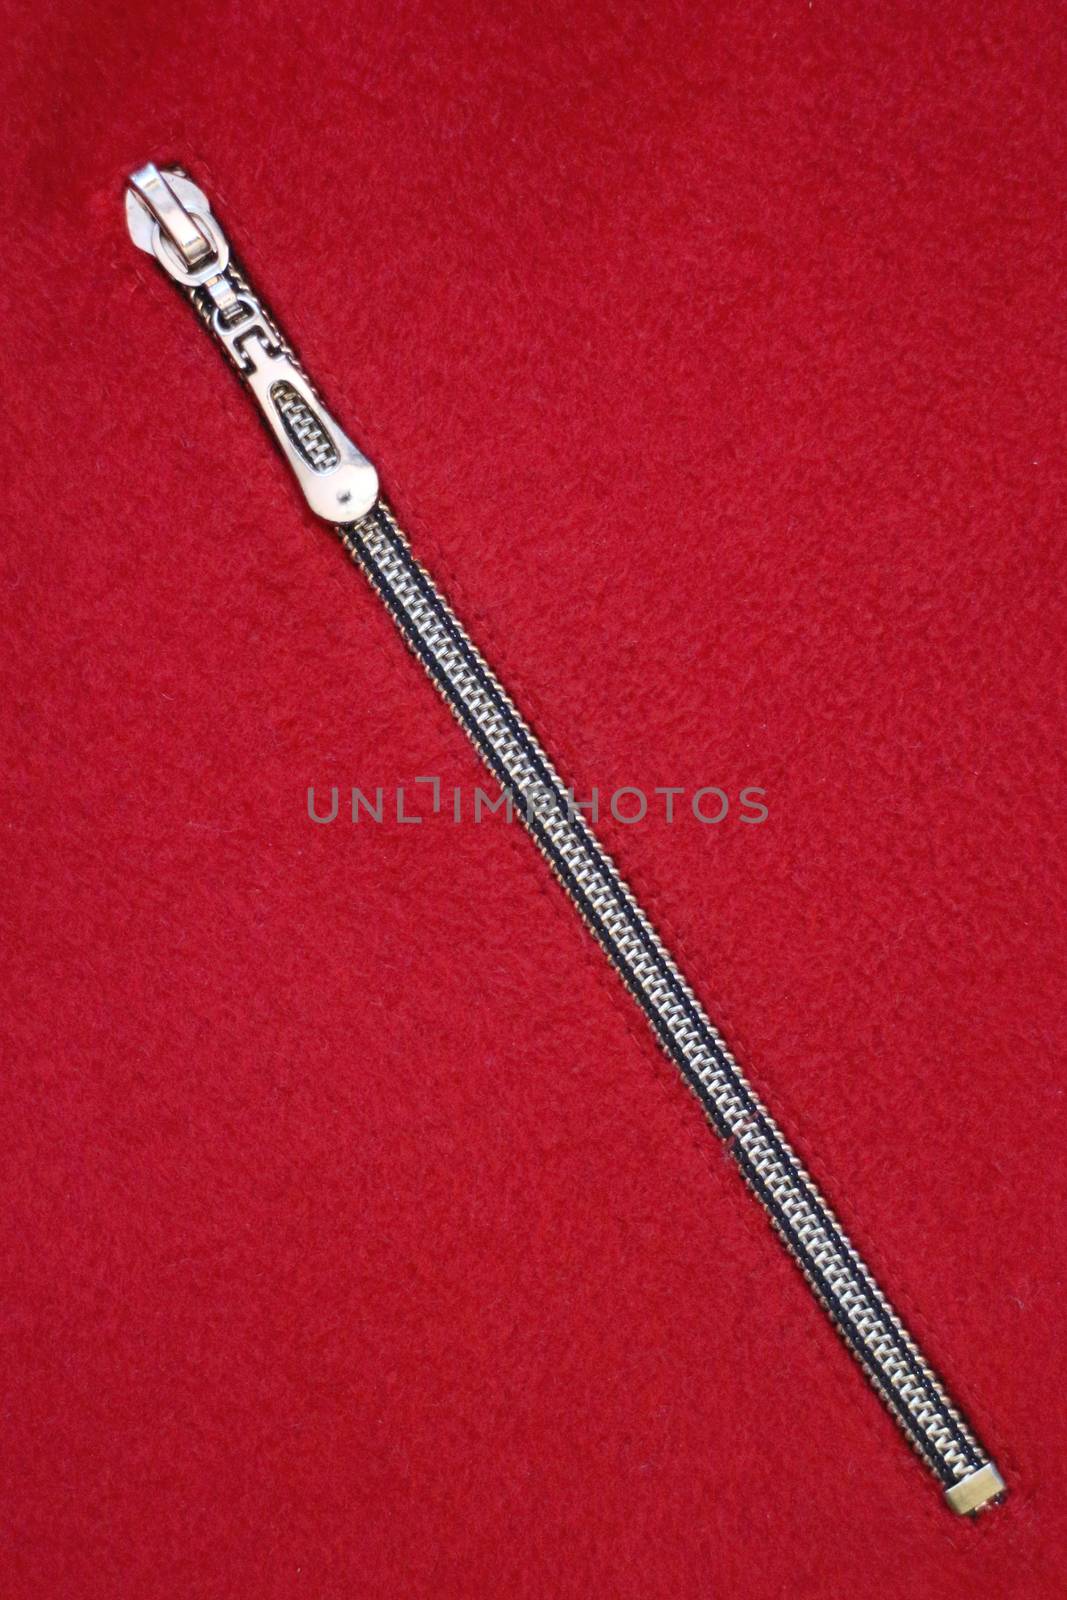 closed pocket zipper on a red background